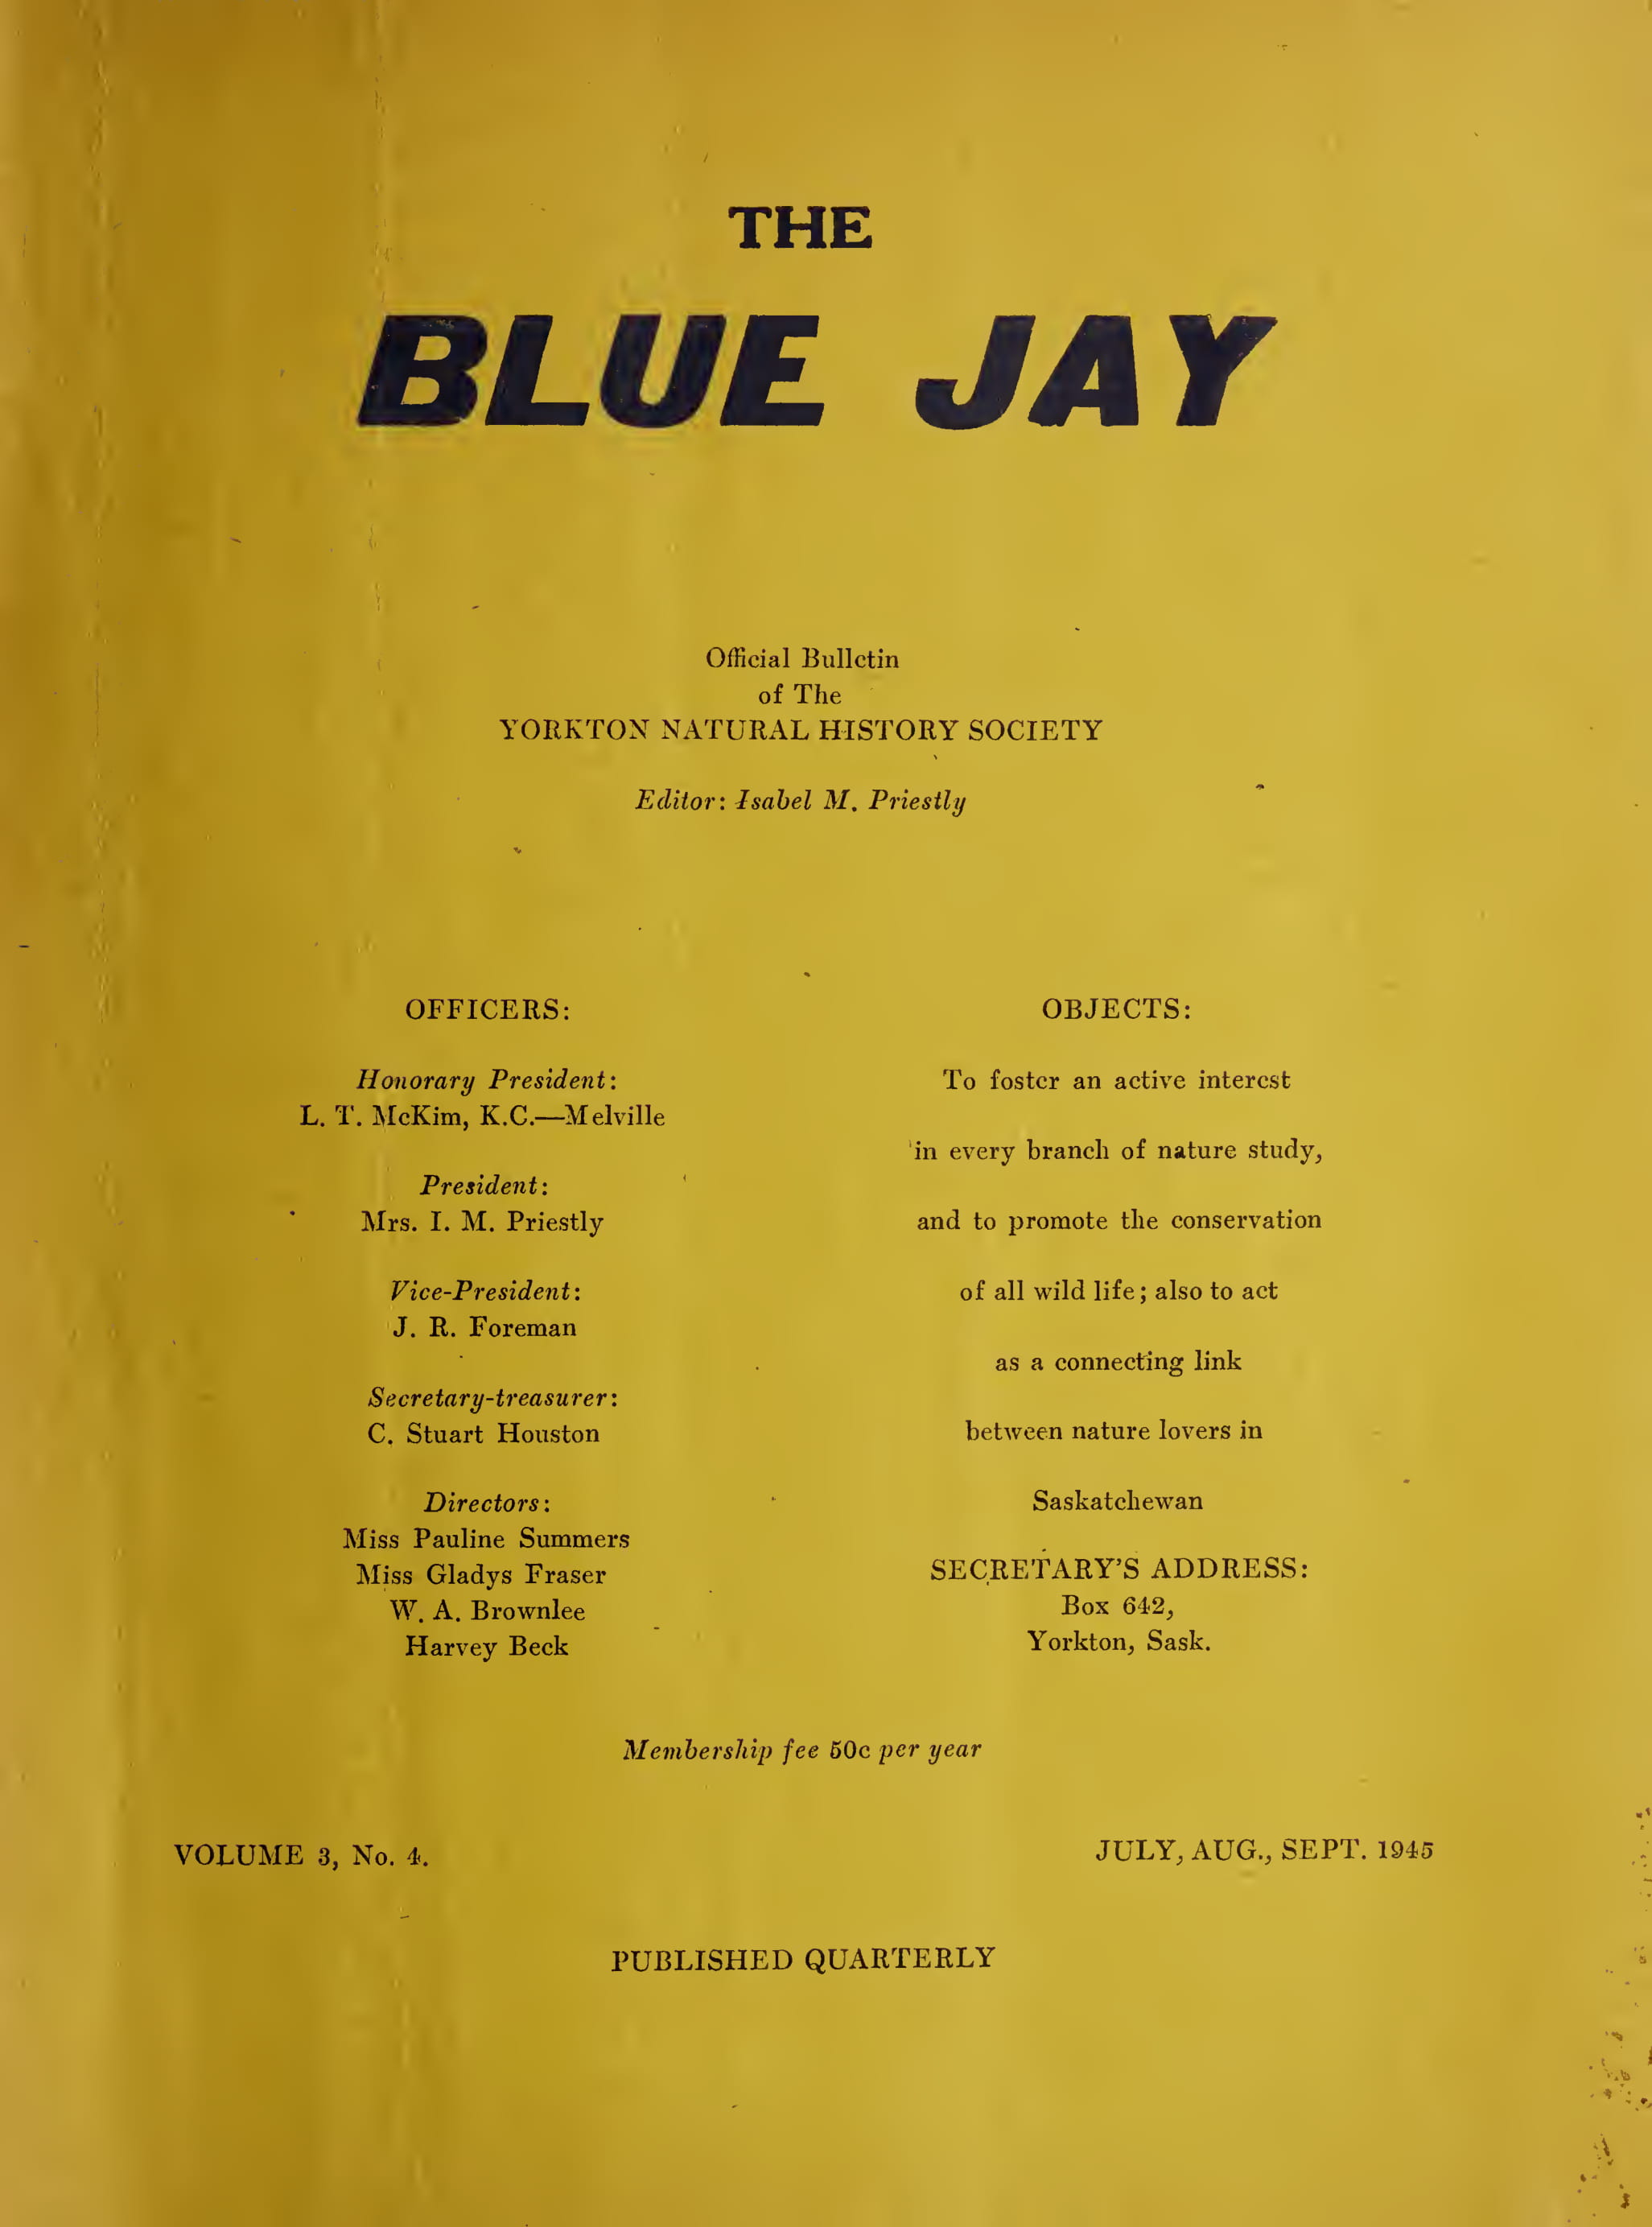 Cover Image for Summer 1945